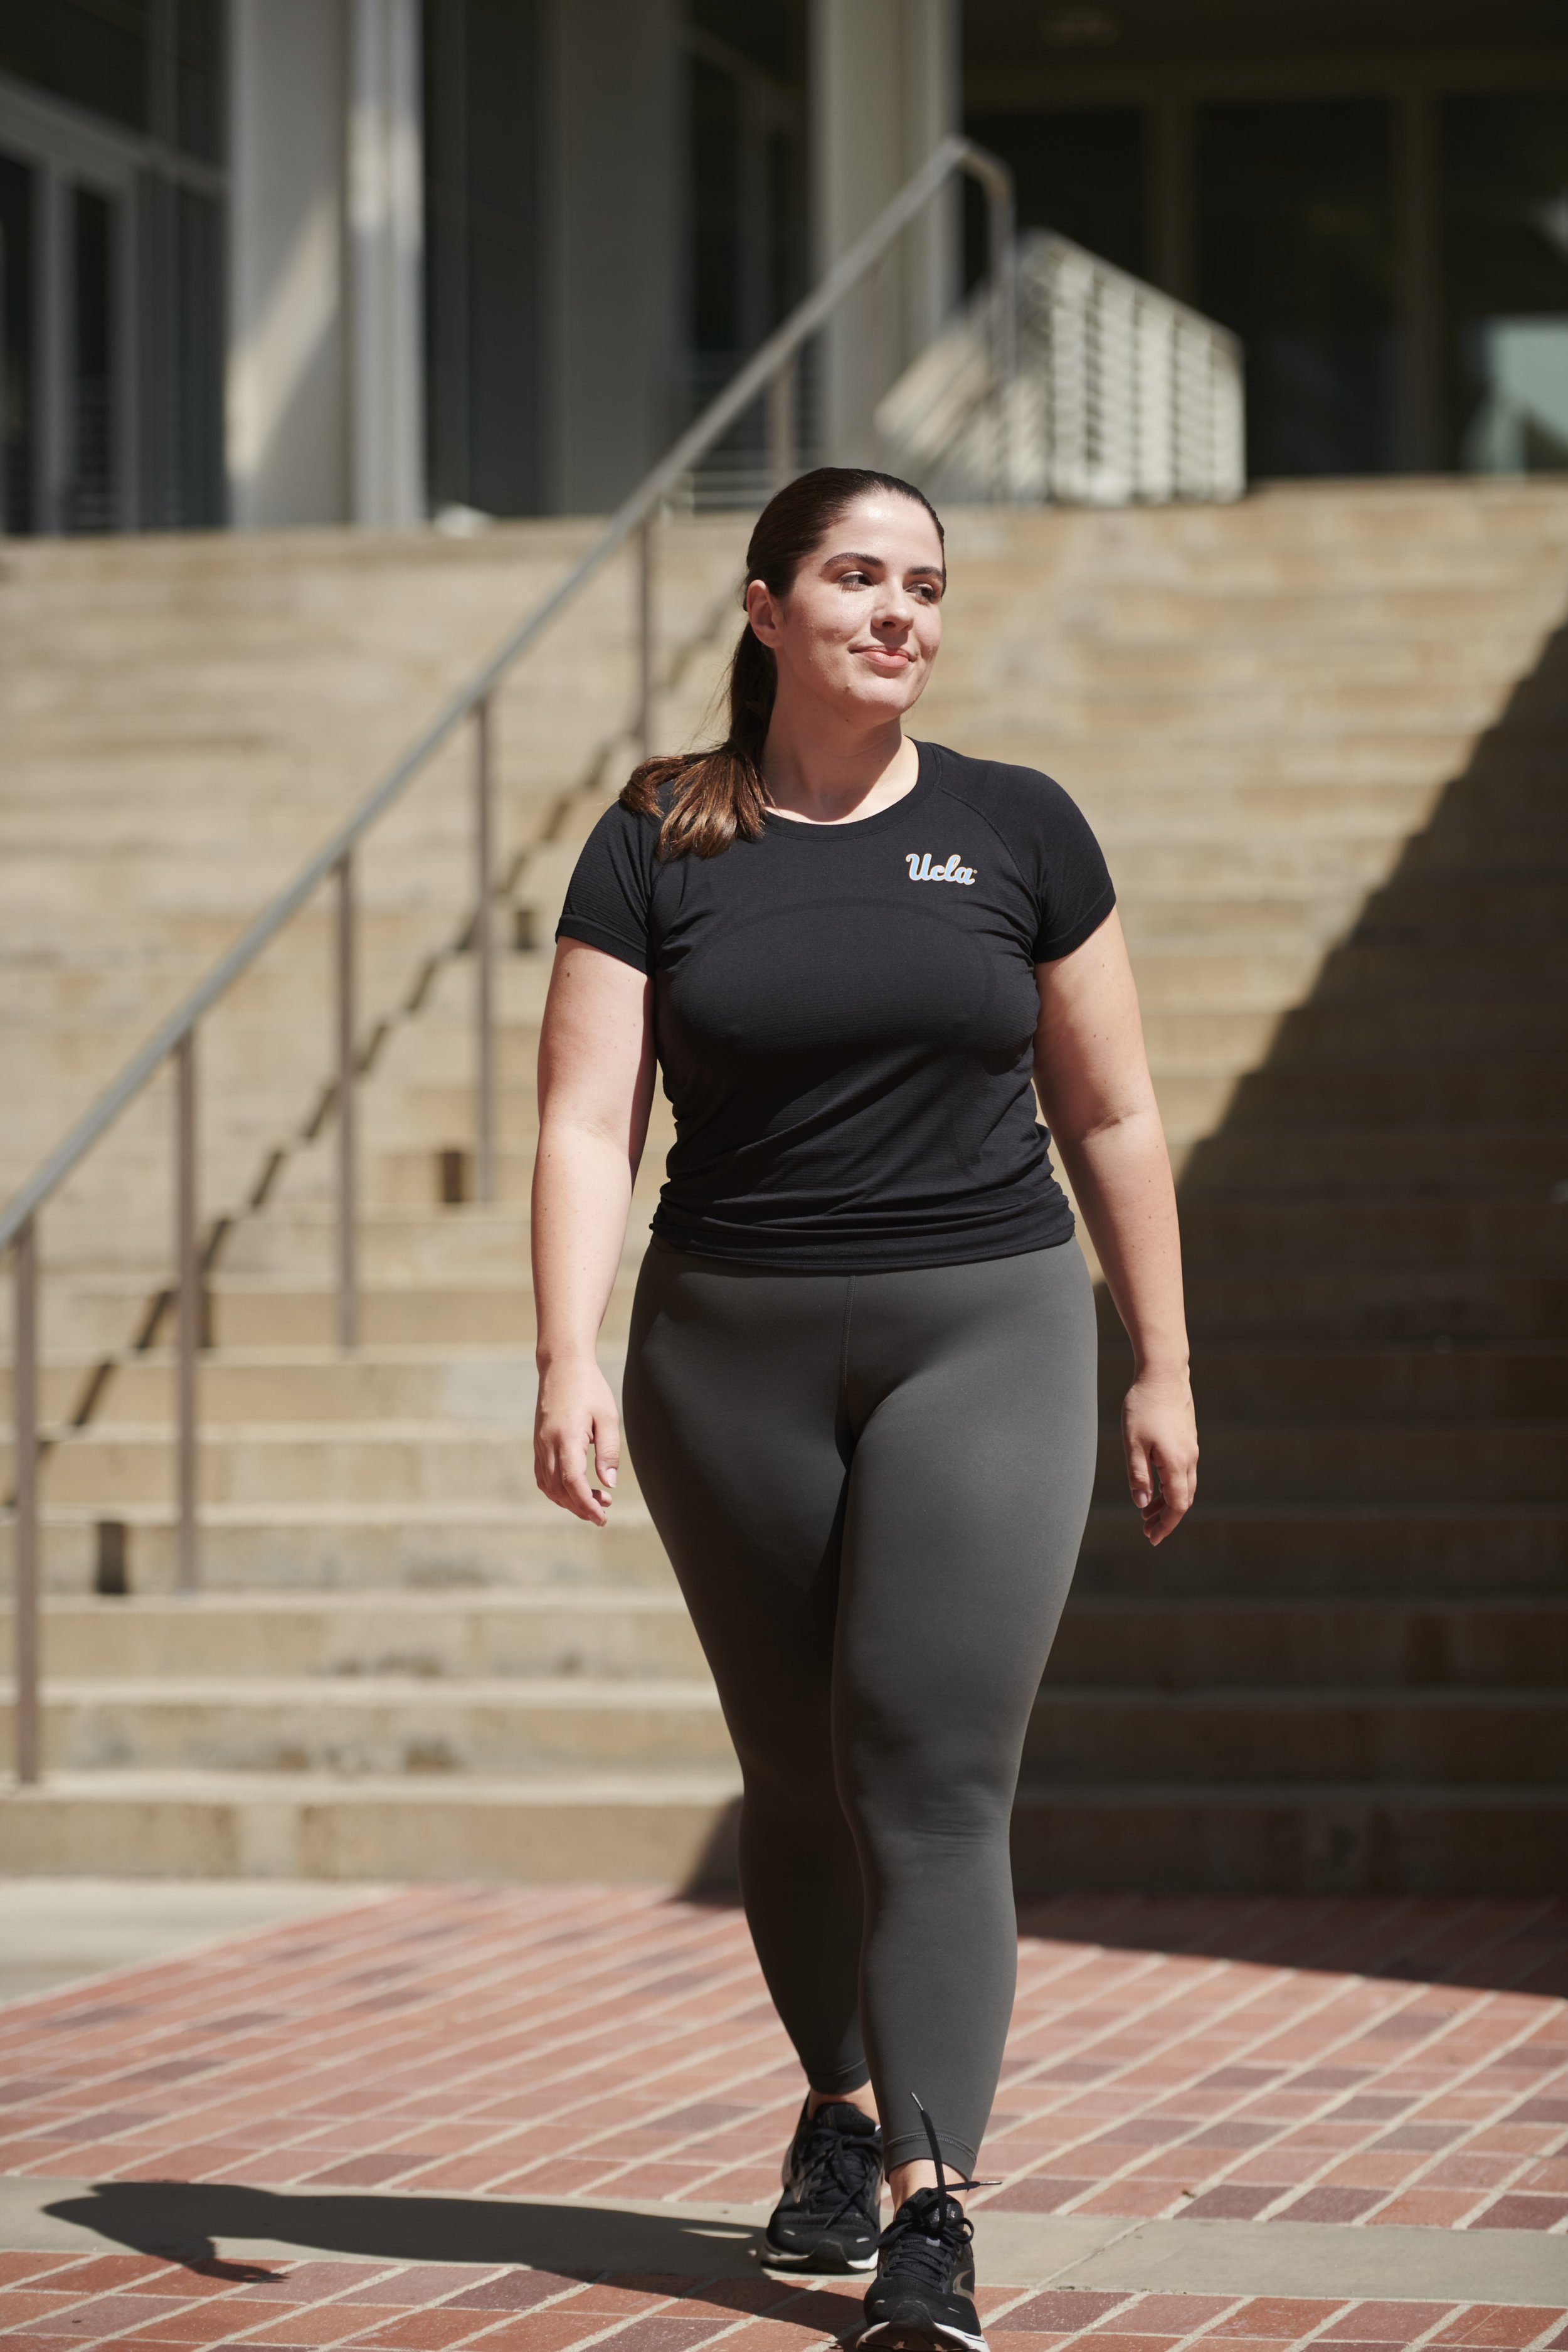 Step into style: UCLA // lululemon collection drops at UCLA Store